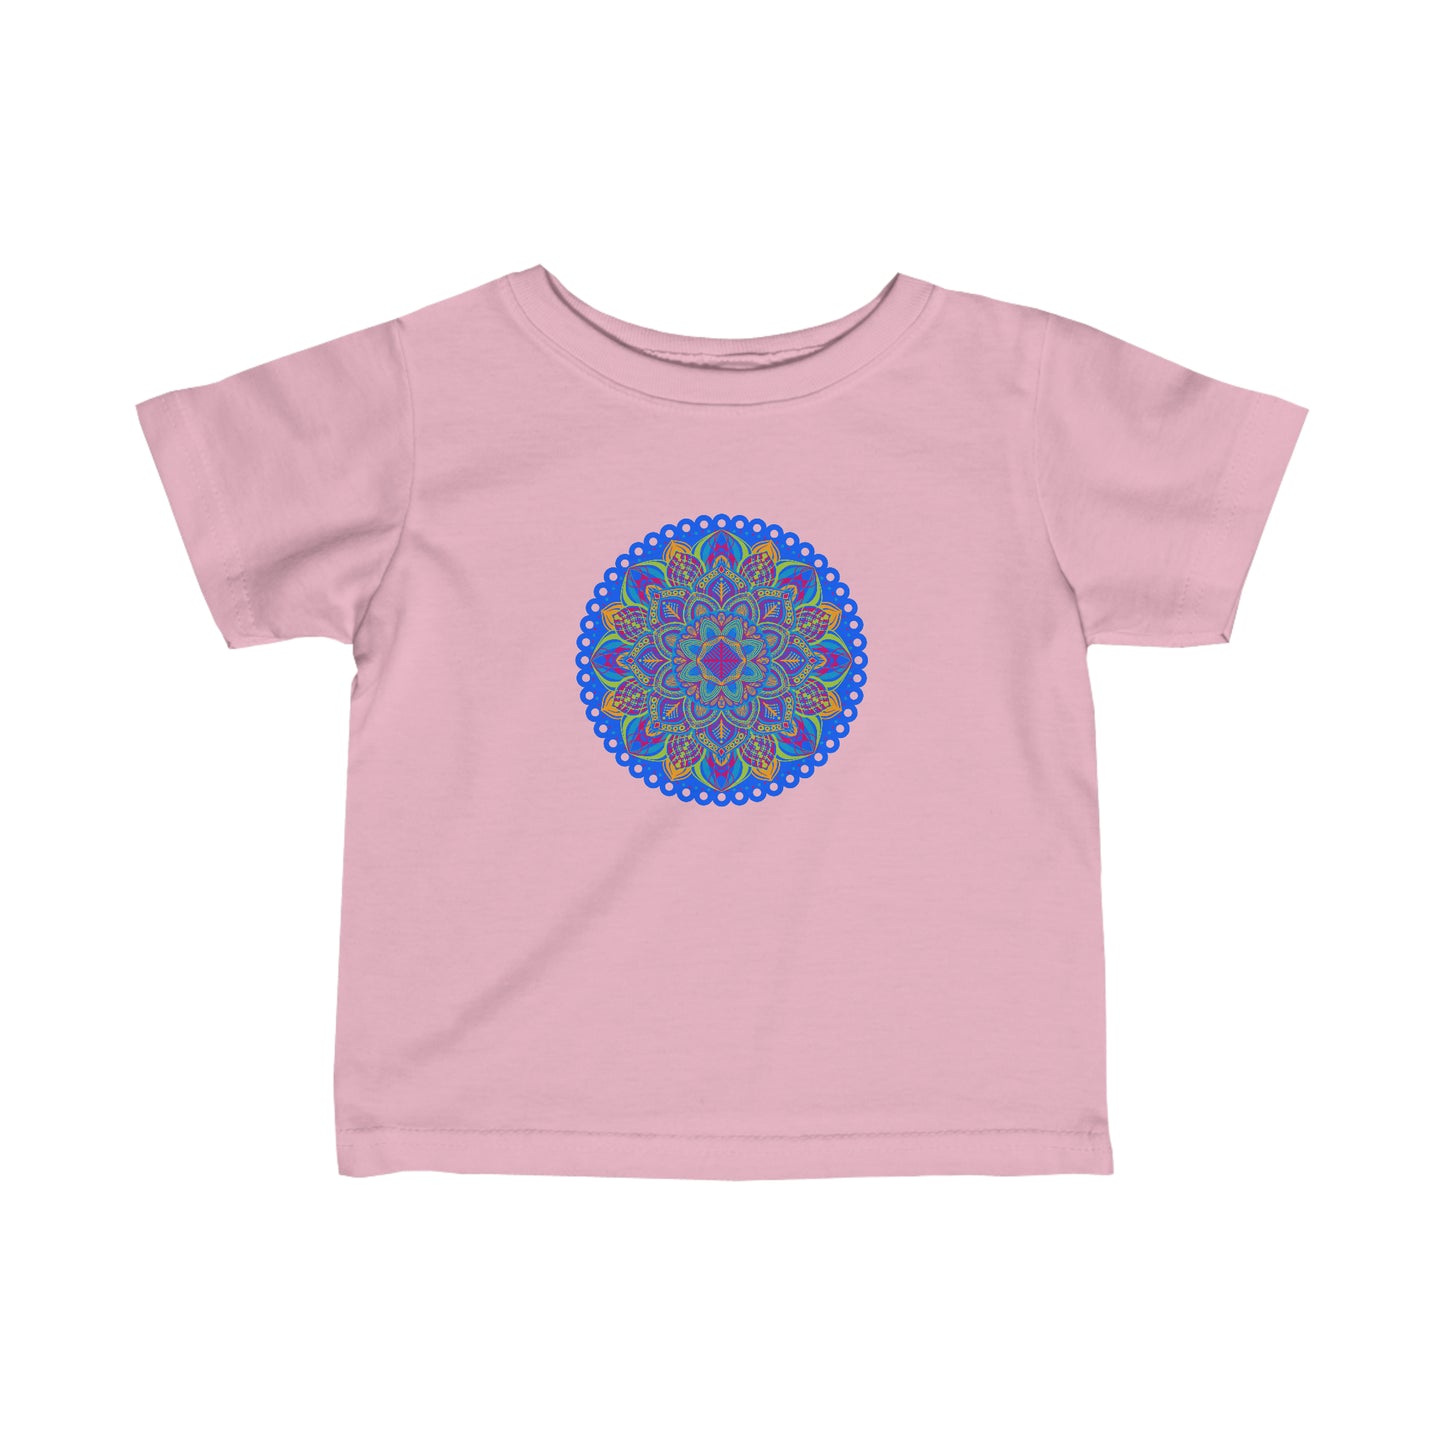 Art, Colorful, Nature, Garden, Flowers- Baby, Infant, Toddler, T-shirt